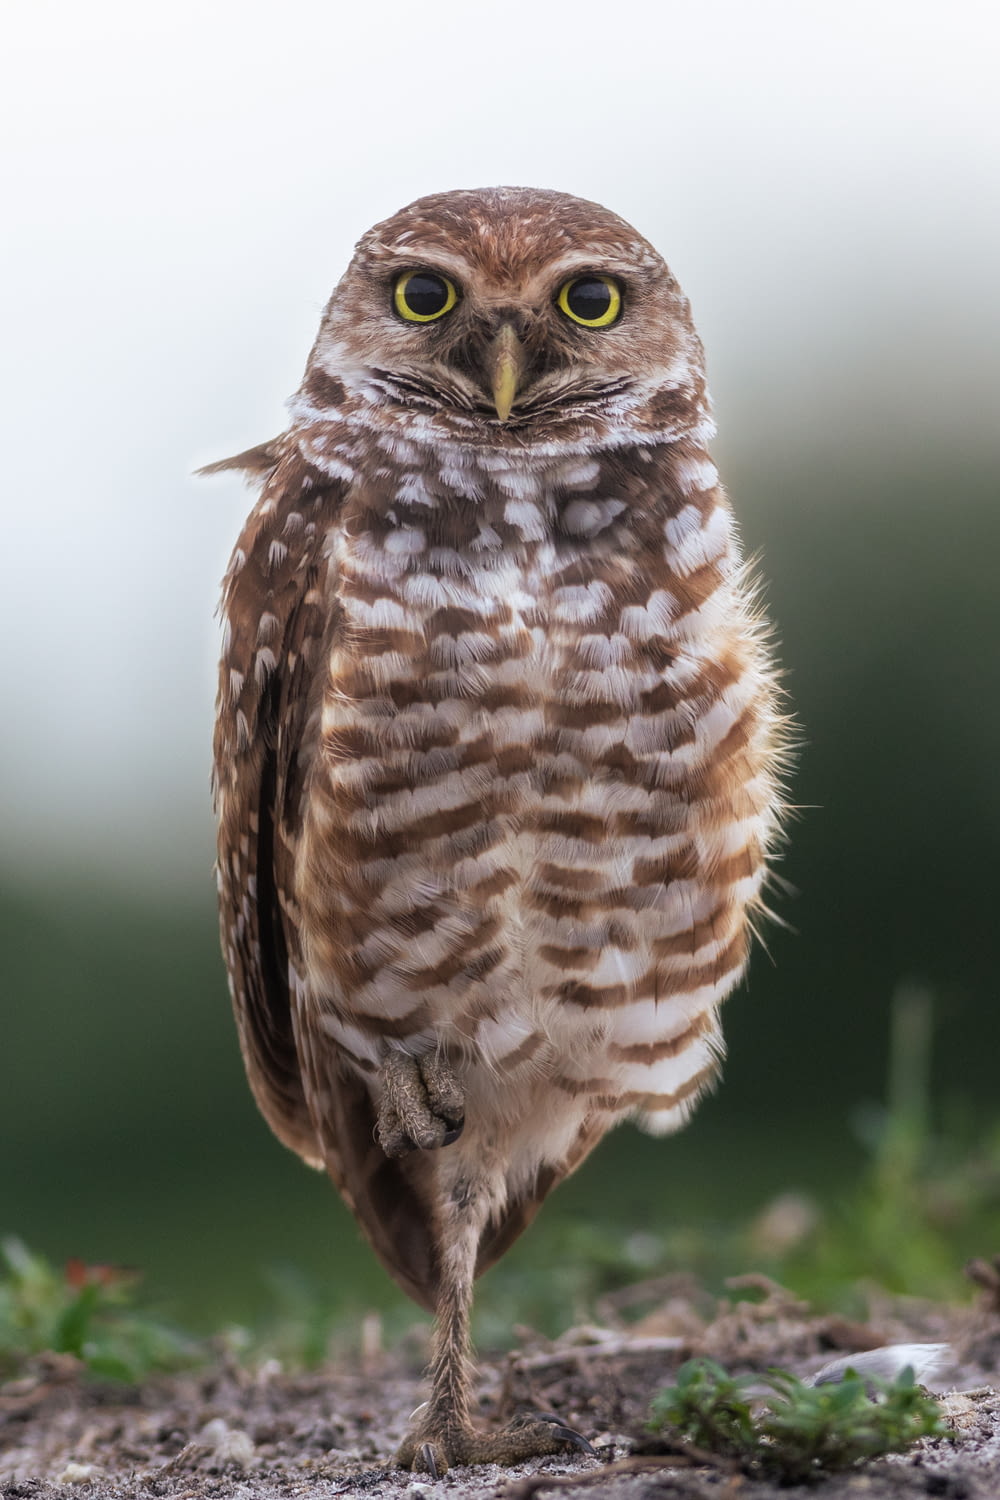 a small owl standing on top of a dirt field